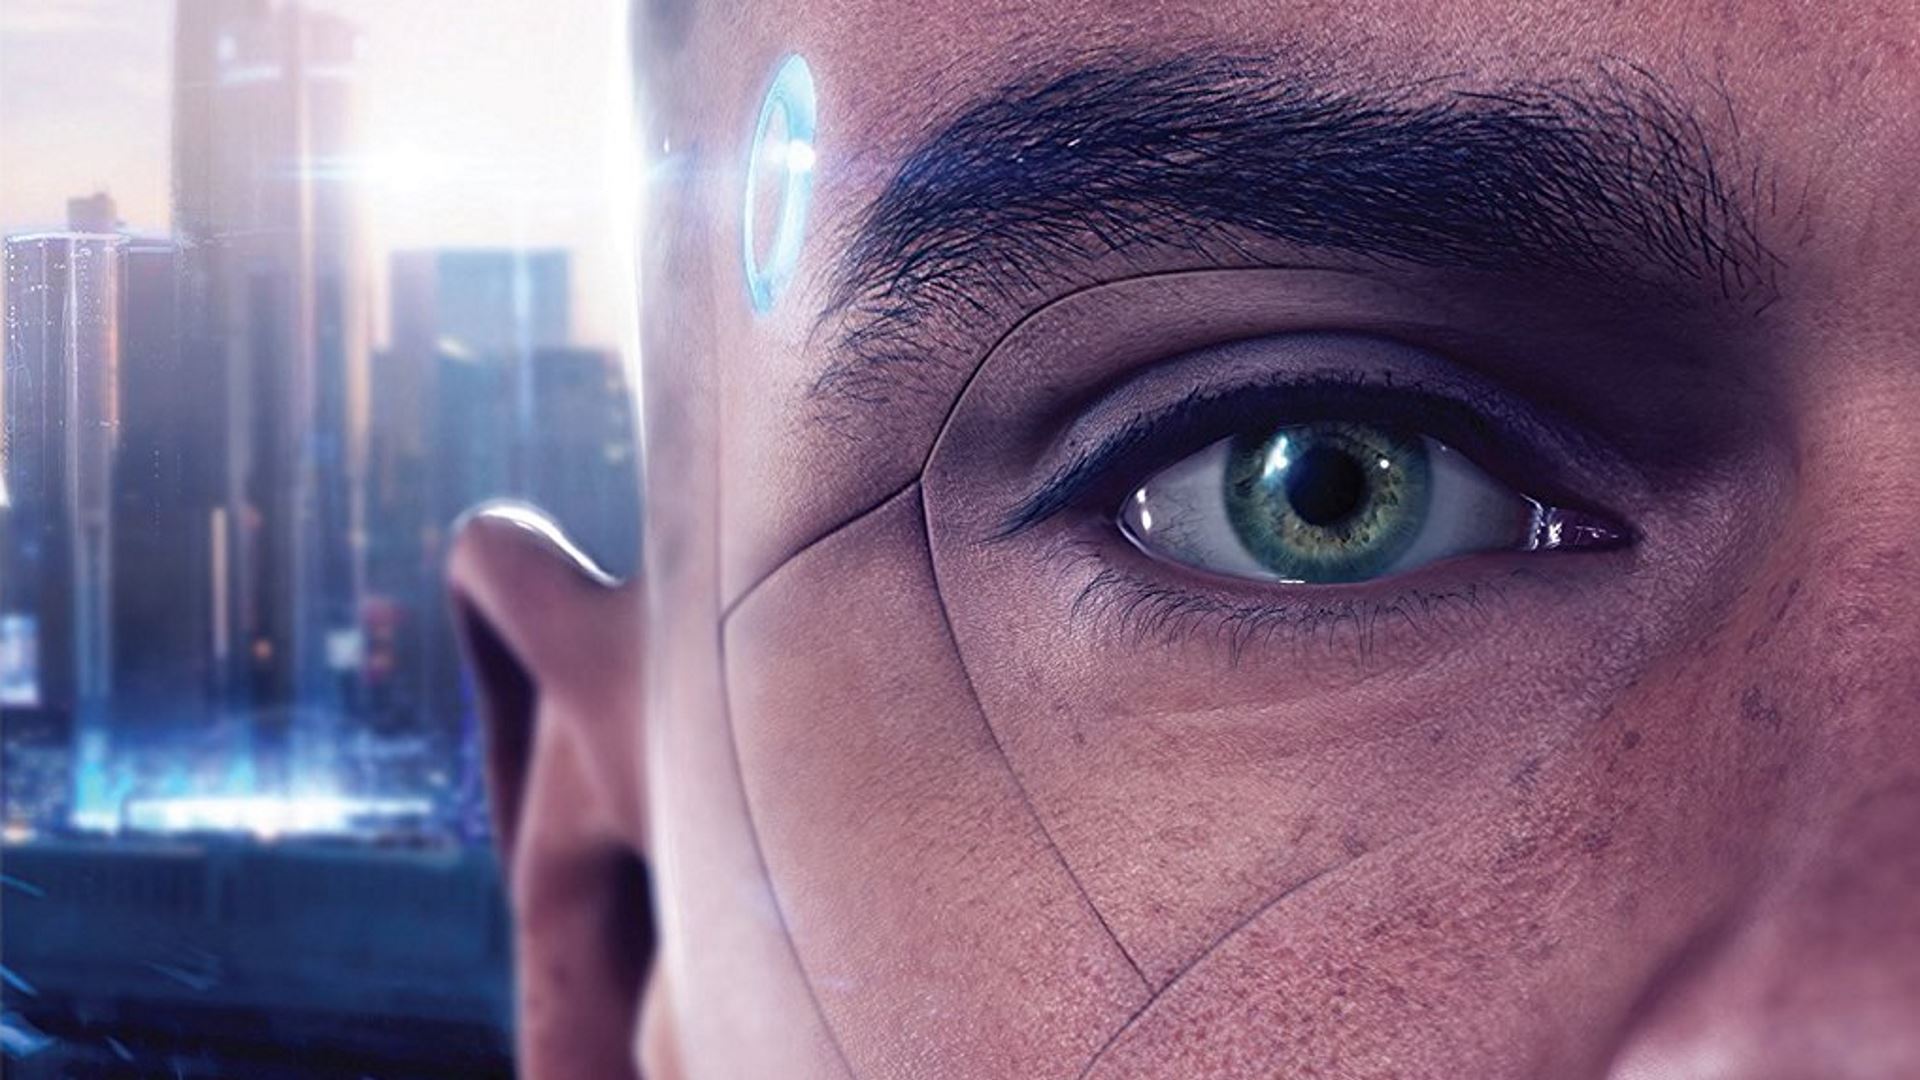 Detroit: Become Human review on PlayStation 4